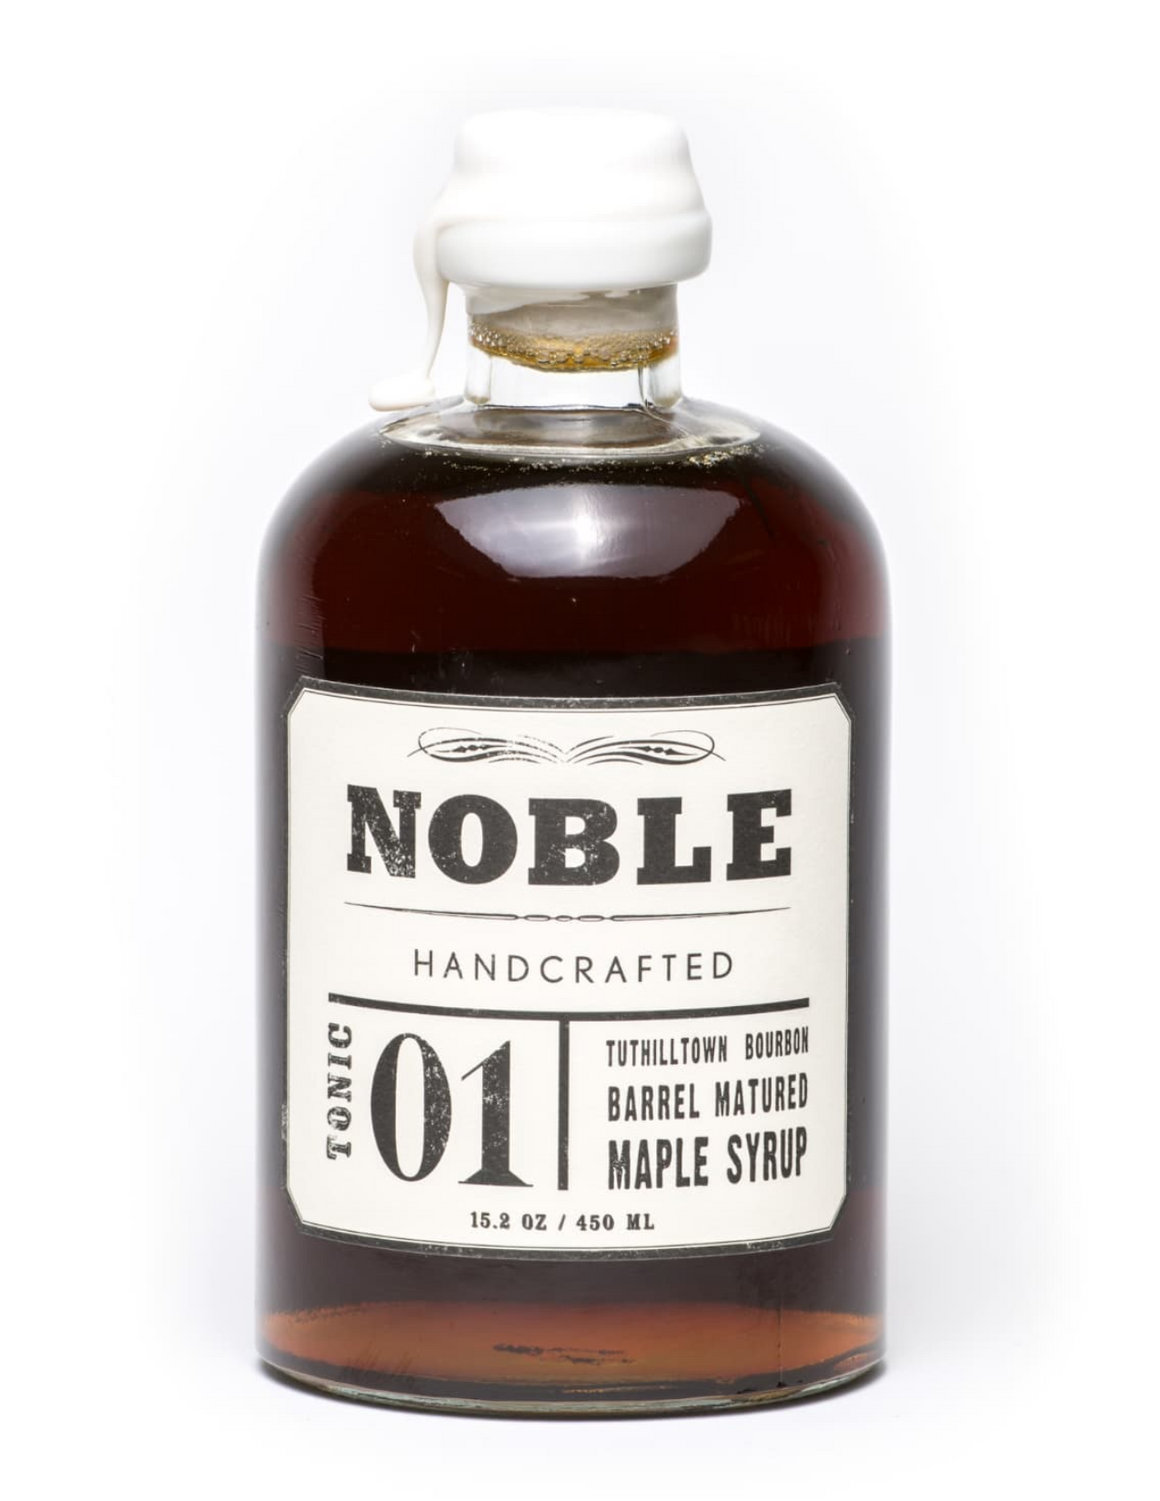 Noble Handcrafted - Tuthilltown Bourbon Barrel Matured Maple Syrup